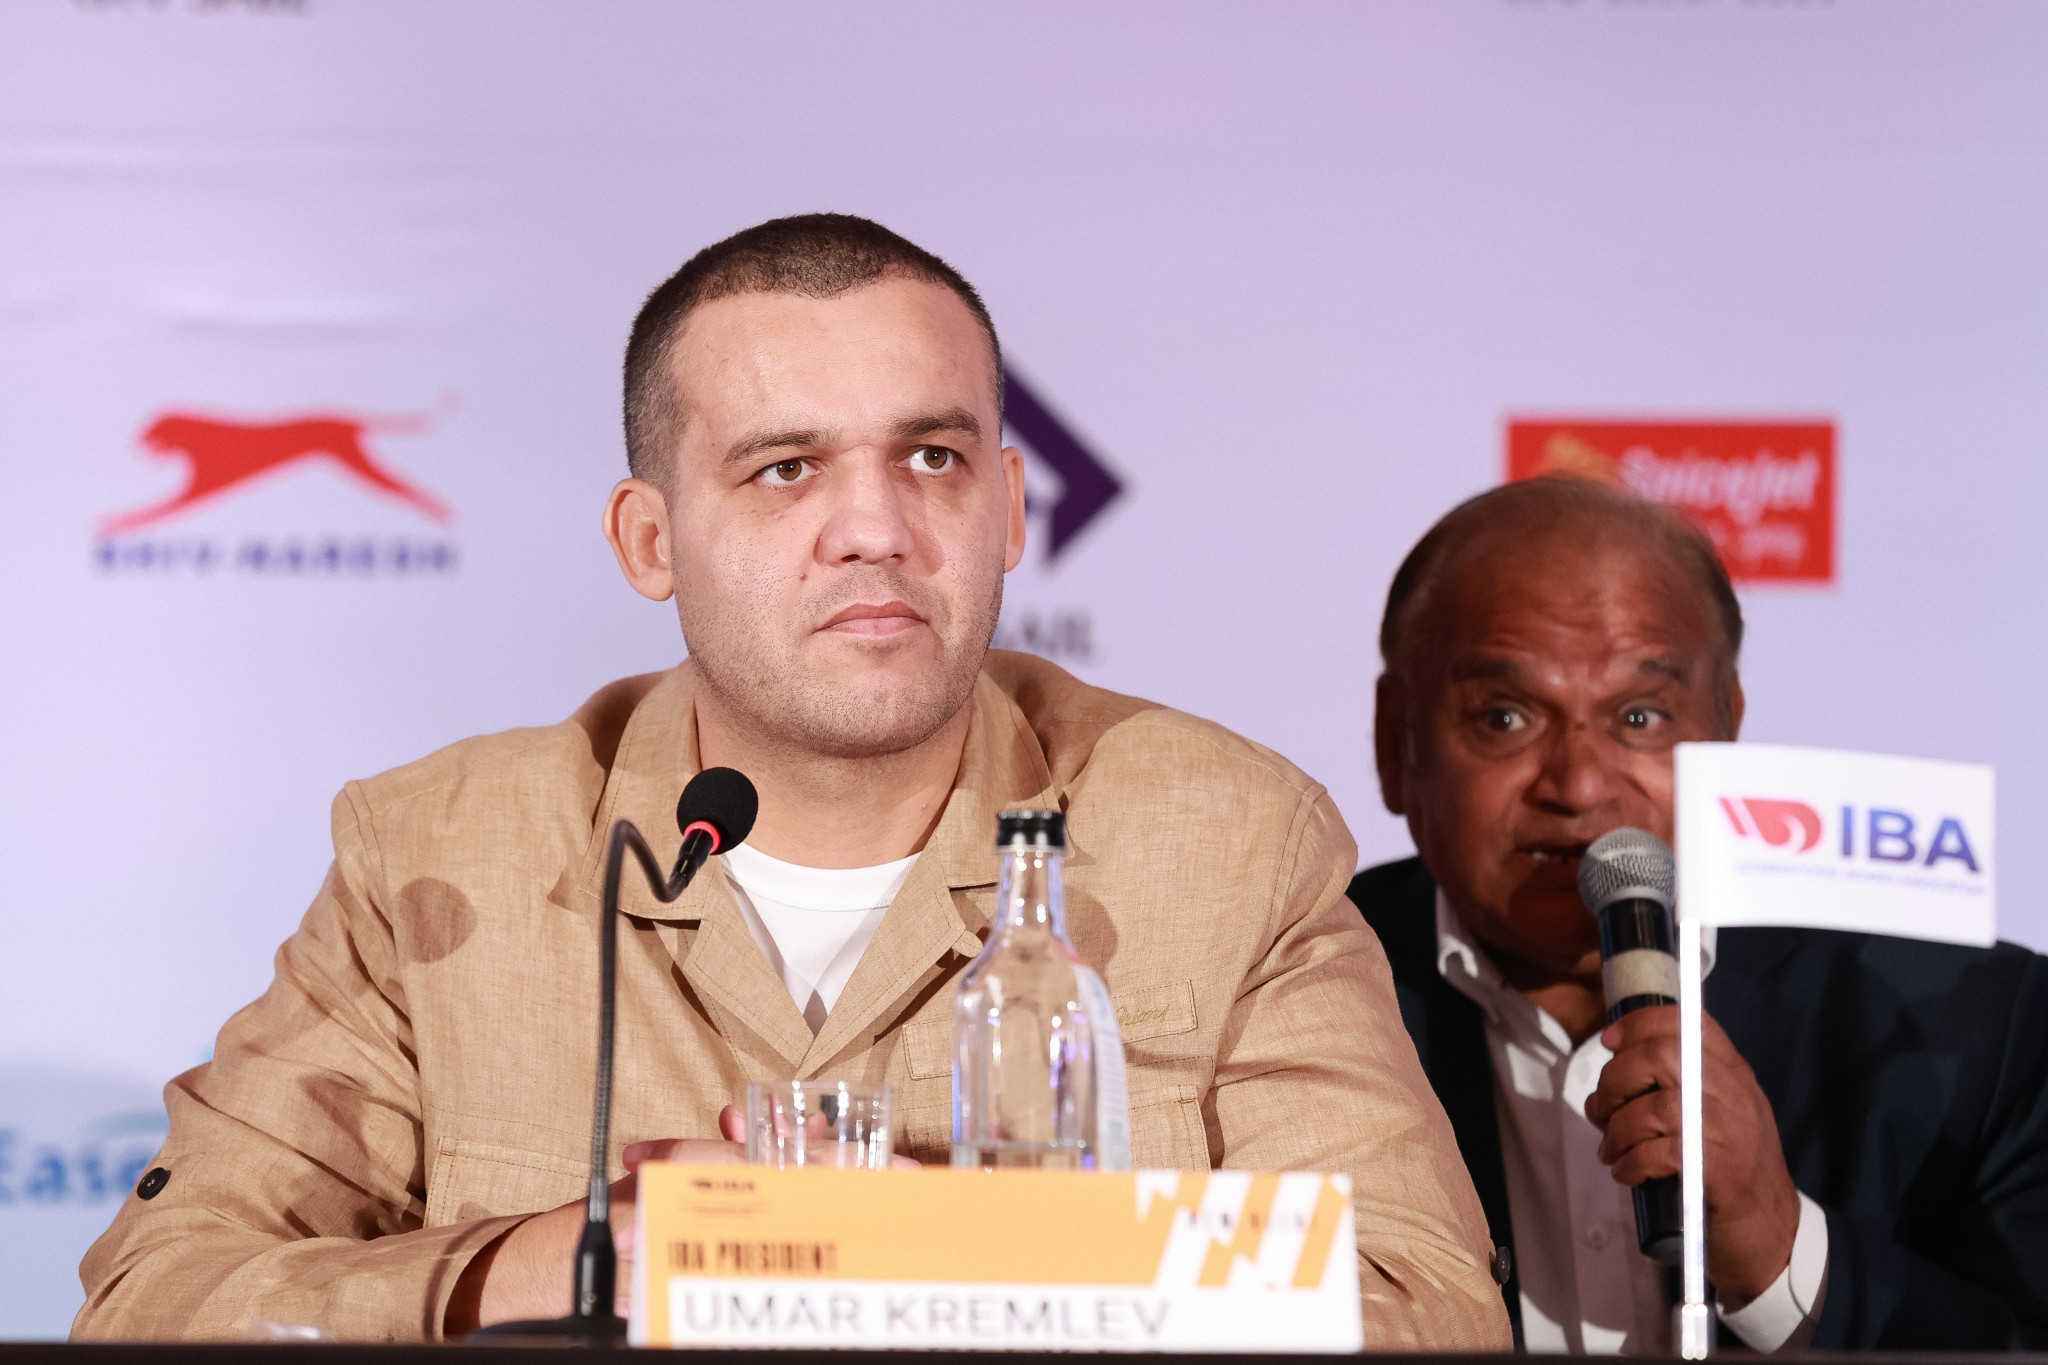 IBA President Umar Kremlev has claimed that the two new events will help athletes progress and 